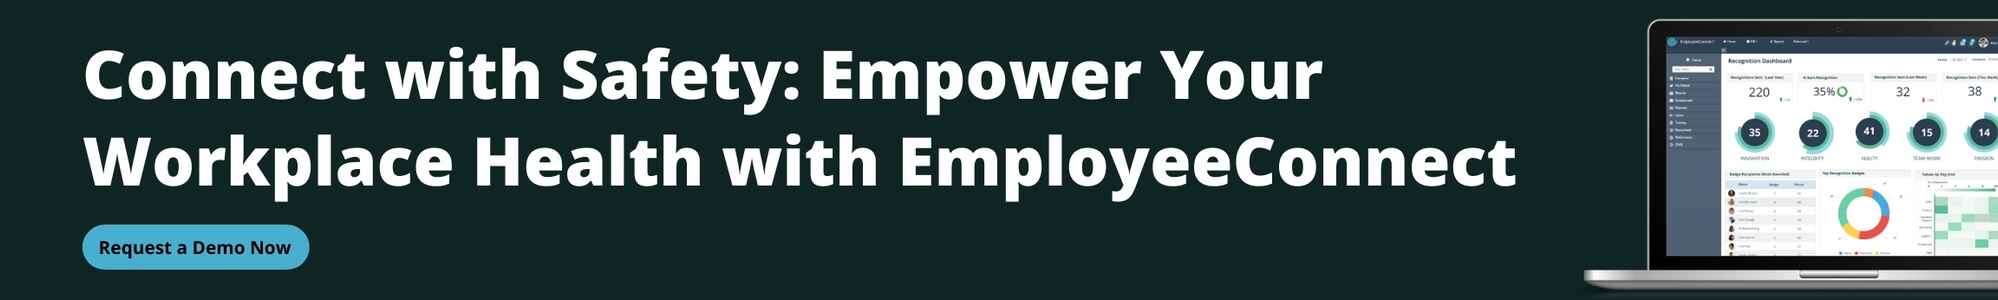 Connect with Safety, Empower Your Workplace Health with EmployeeConnect